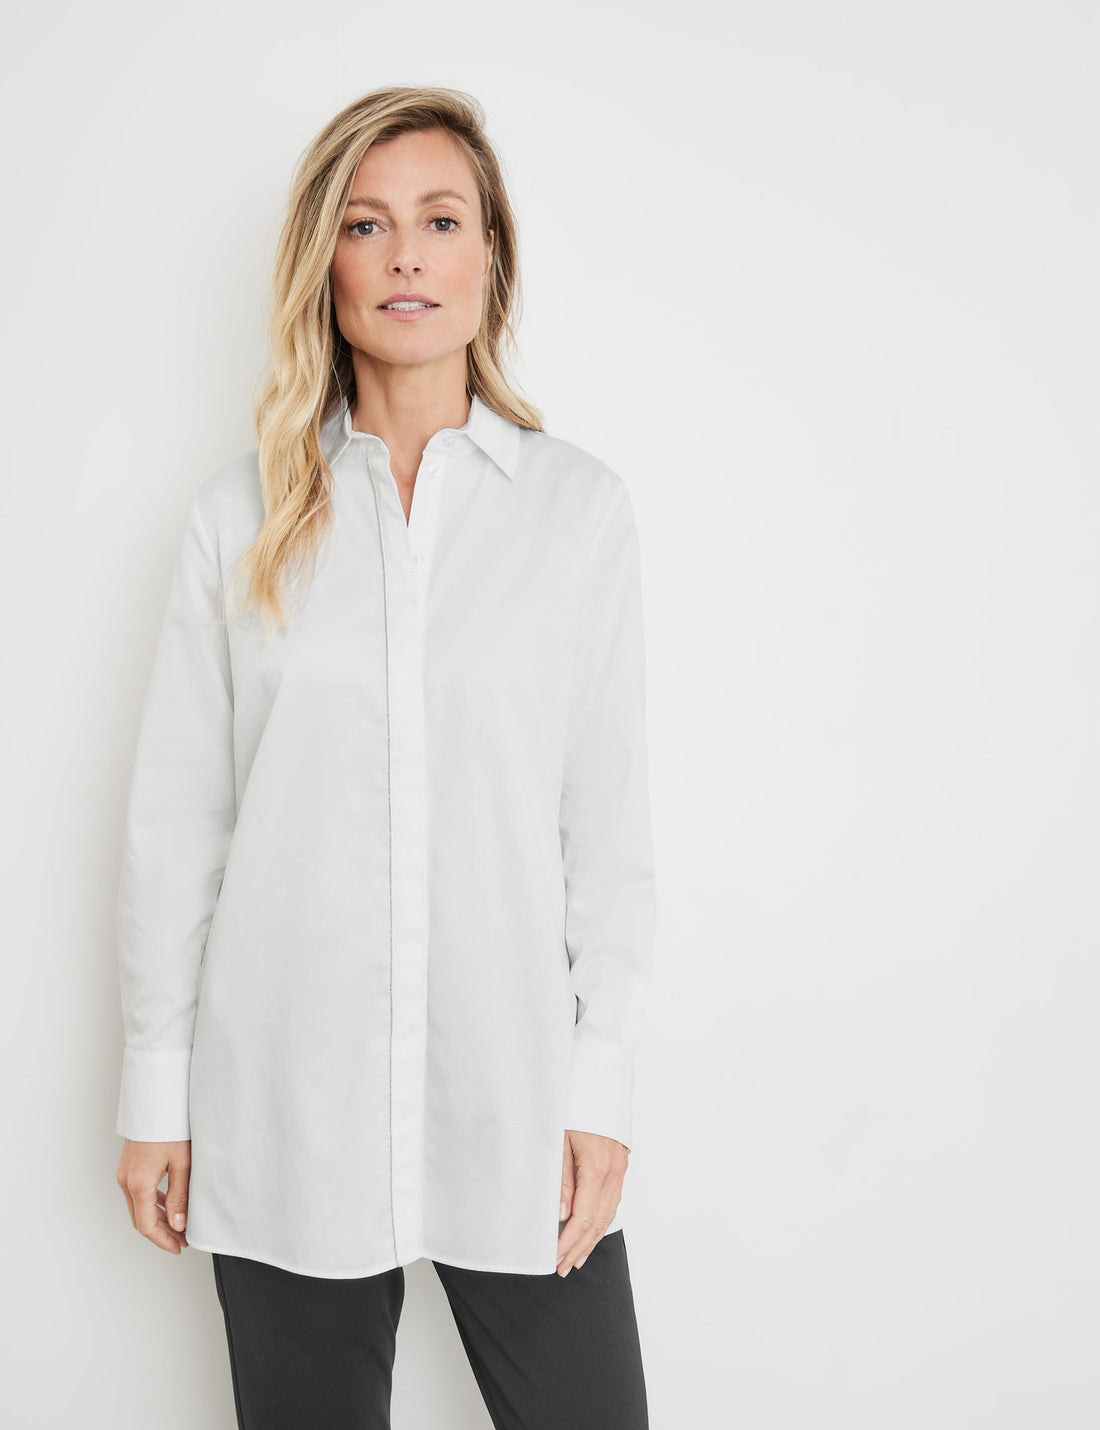 Classic Long Blouse With Side Slits And Gathers_160048-66401_99600_01